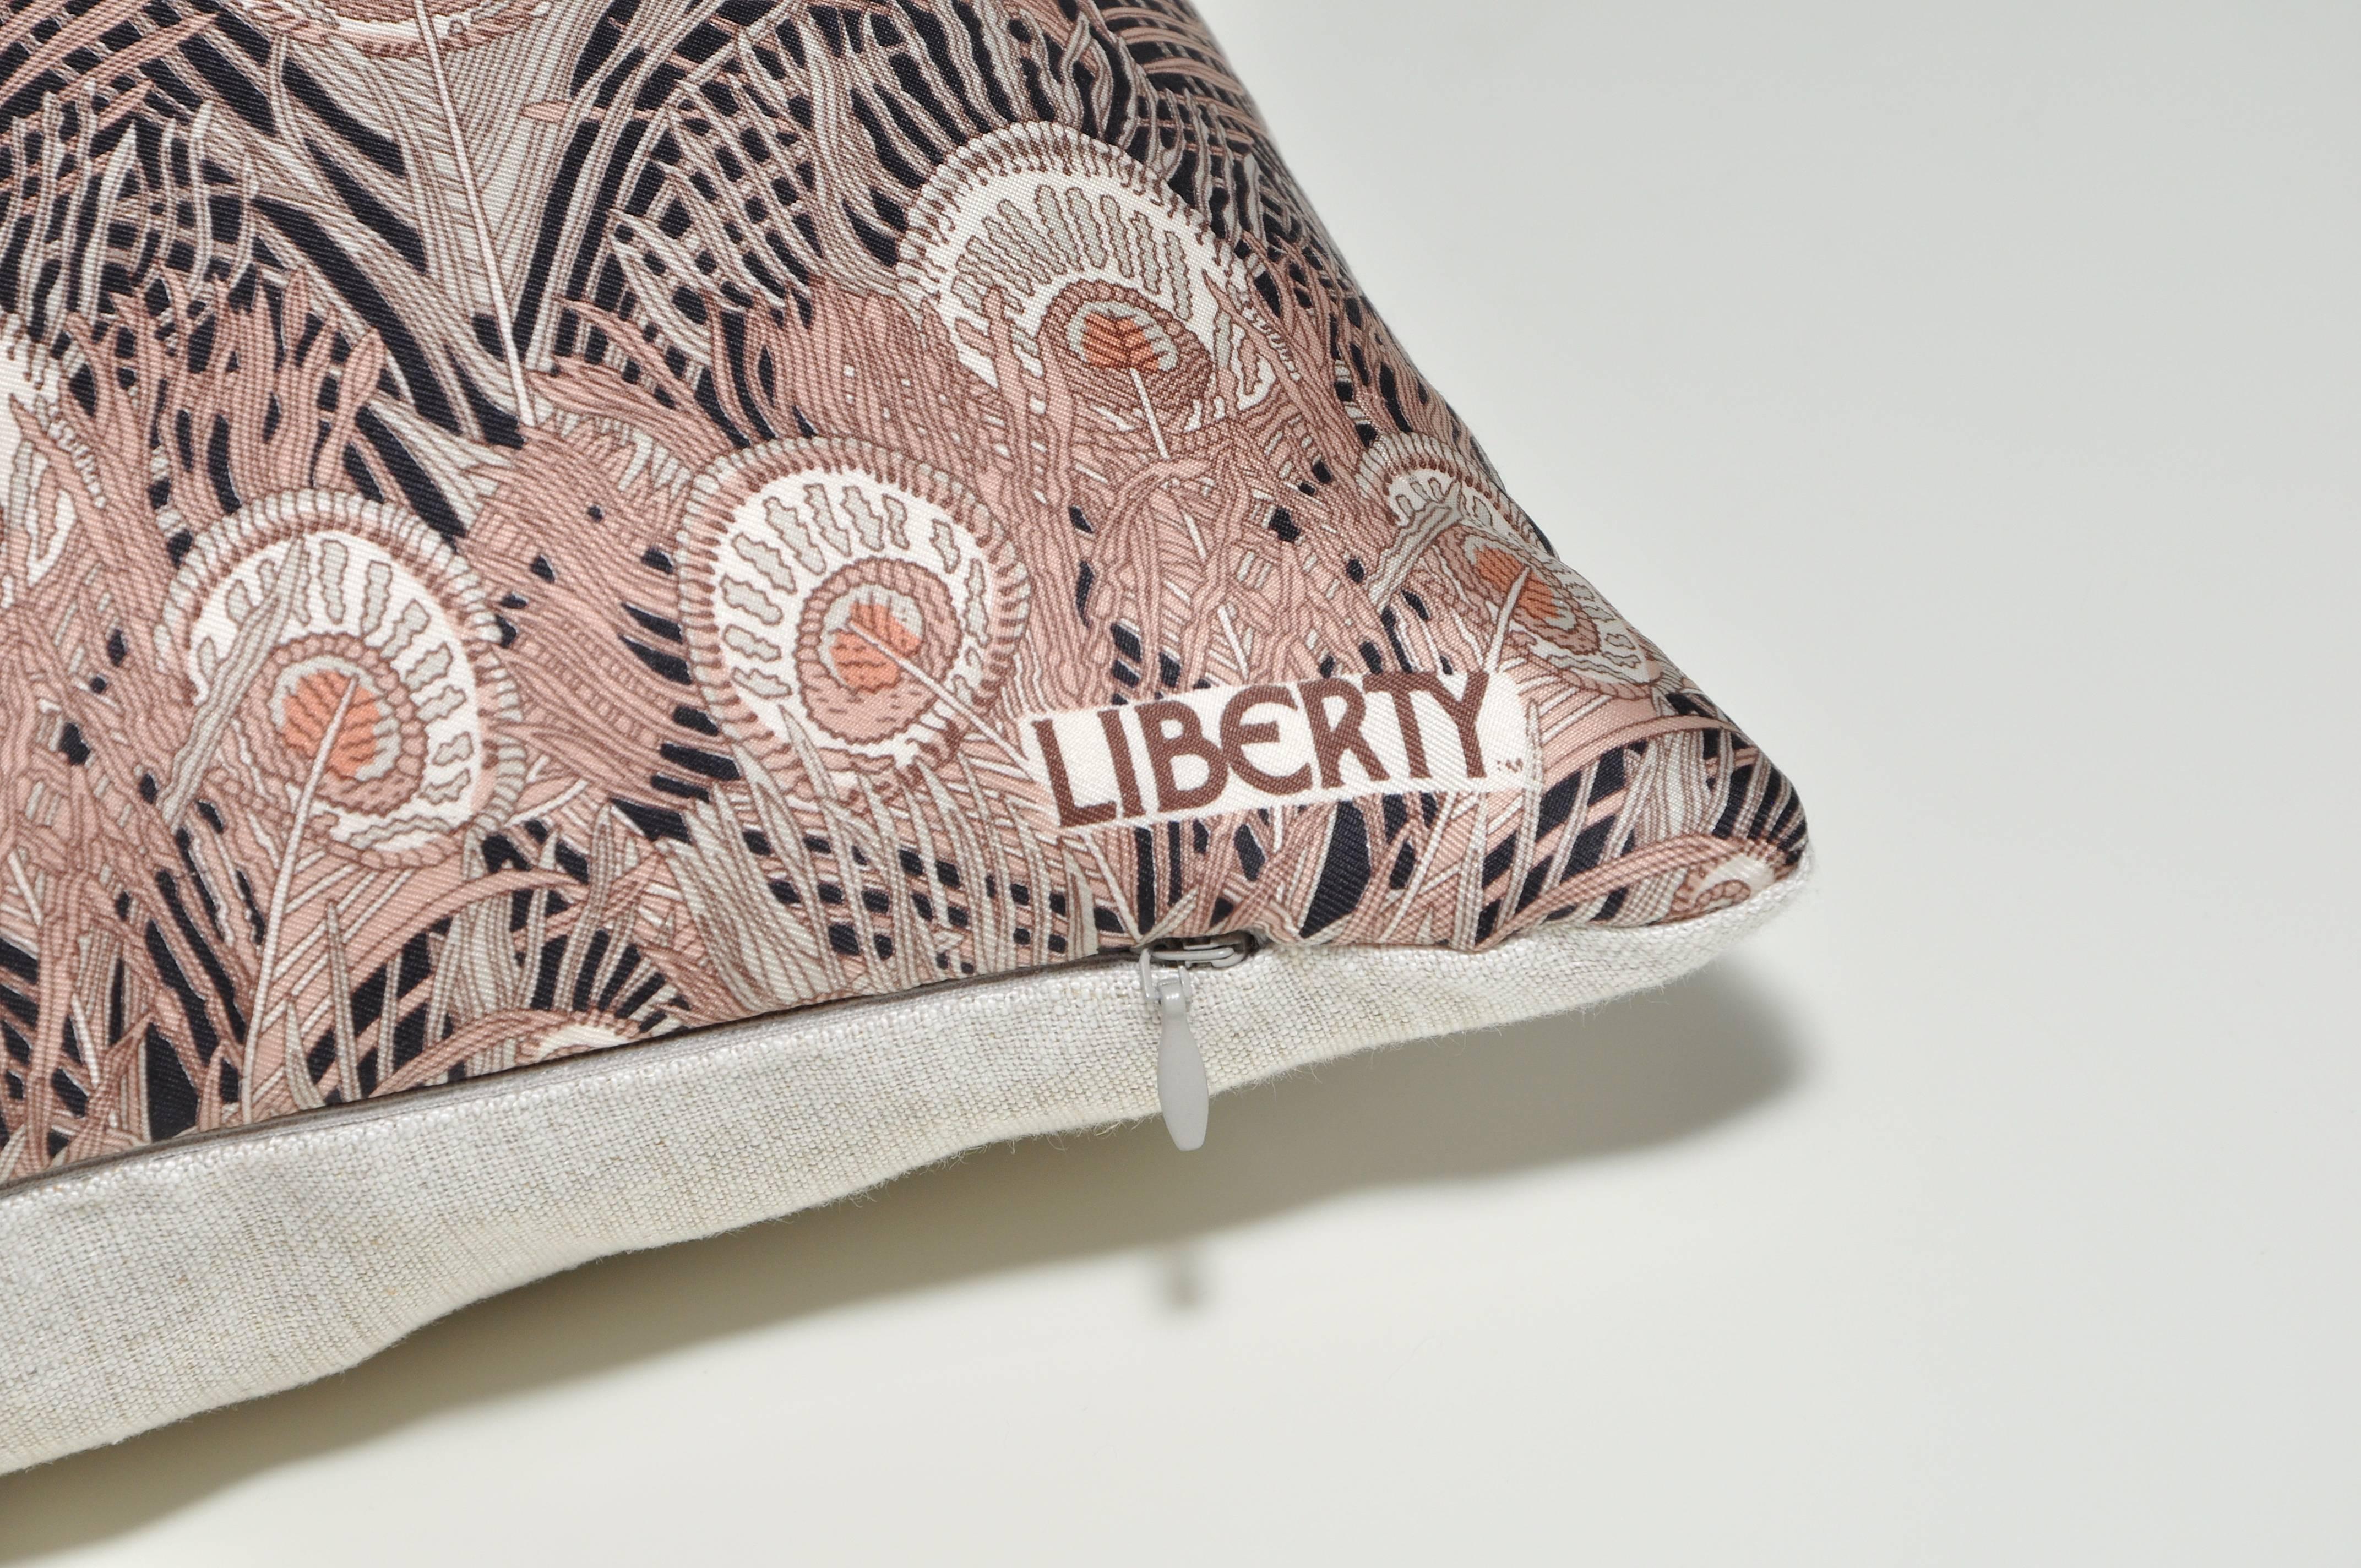 Custom-made one-of-a-kind luxury cushion (pillow) created from an exquisite vintage silk liberty of London scarf in a range of beautiful Autumnal colors. This is Liberty’s 'Hera' design which is the most identifiable with Liberty and dates back to